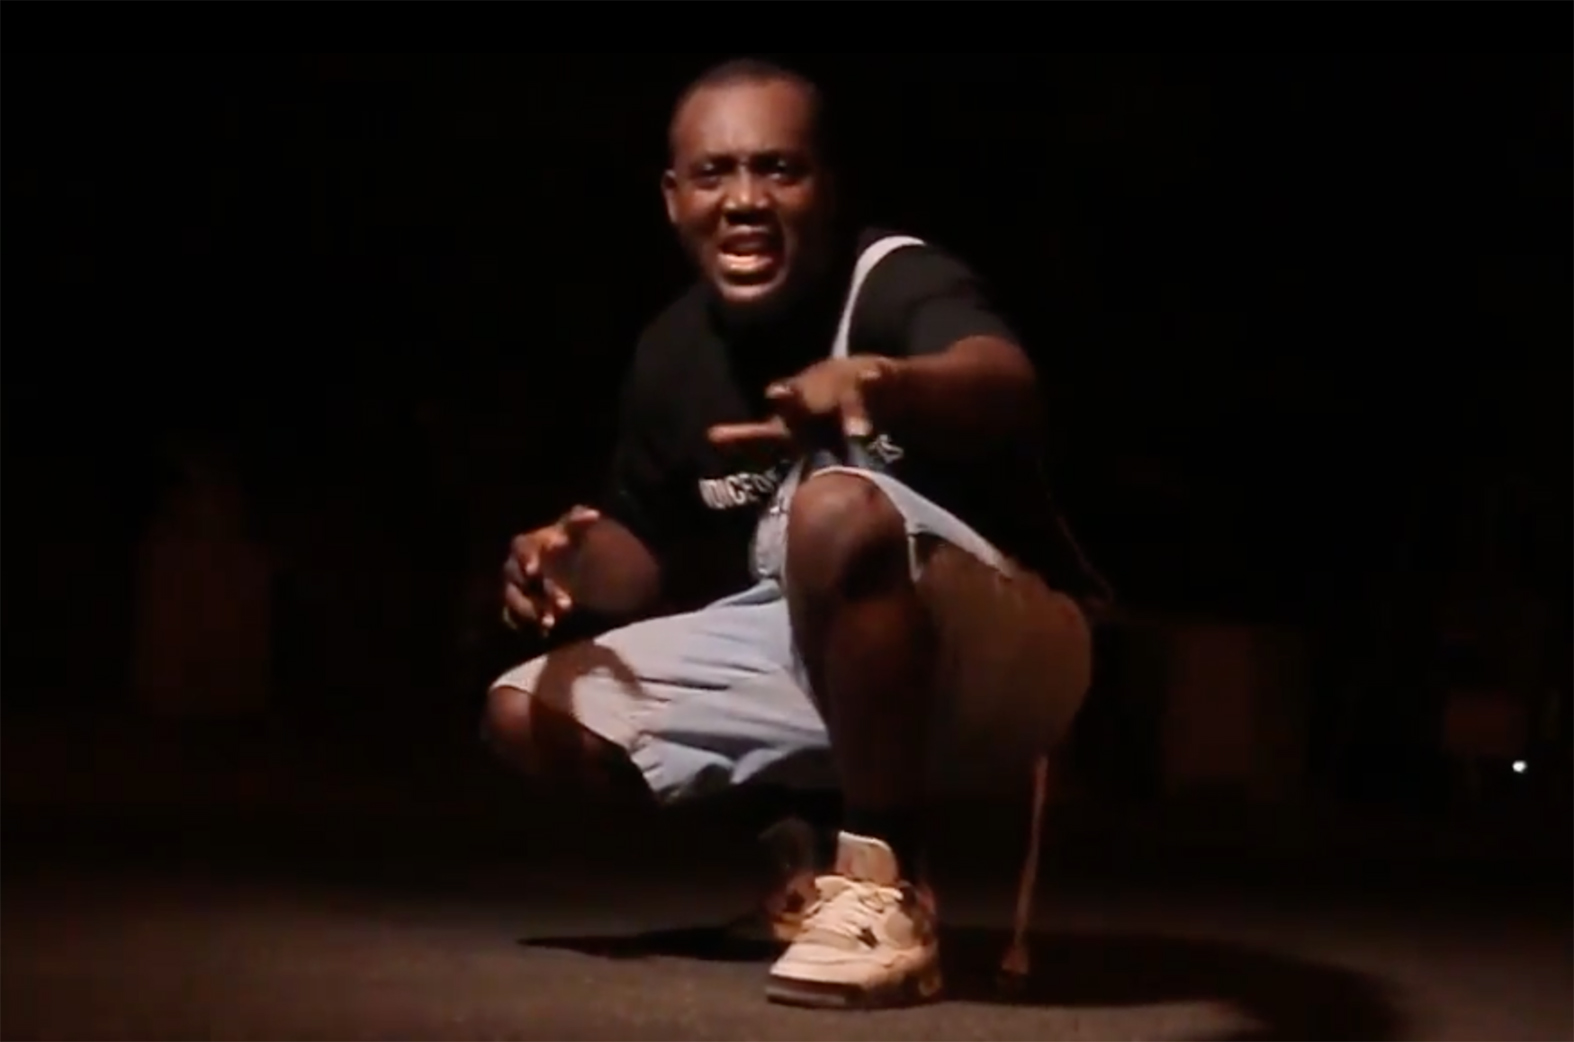 Video: Black Sheep (Freestyle) by Yeyo